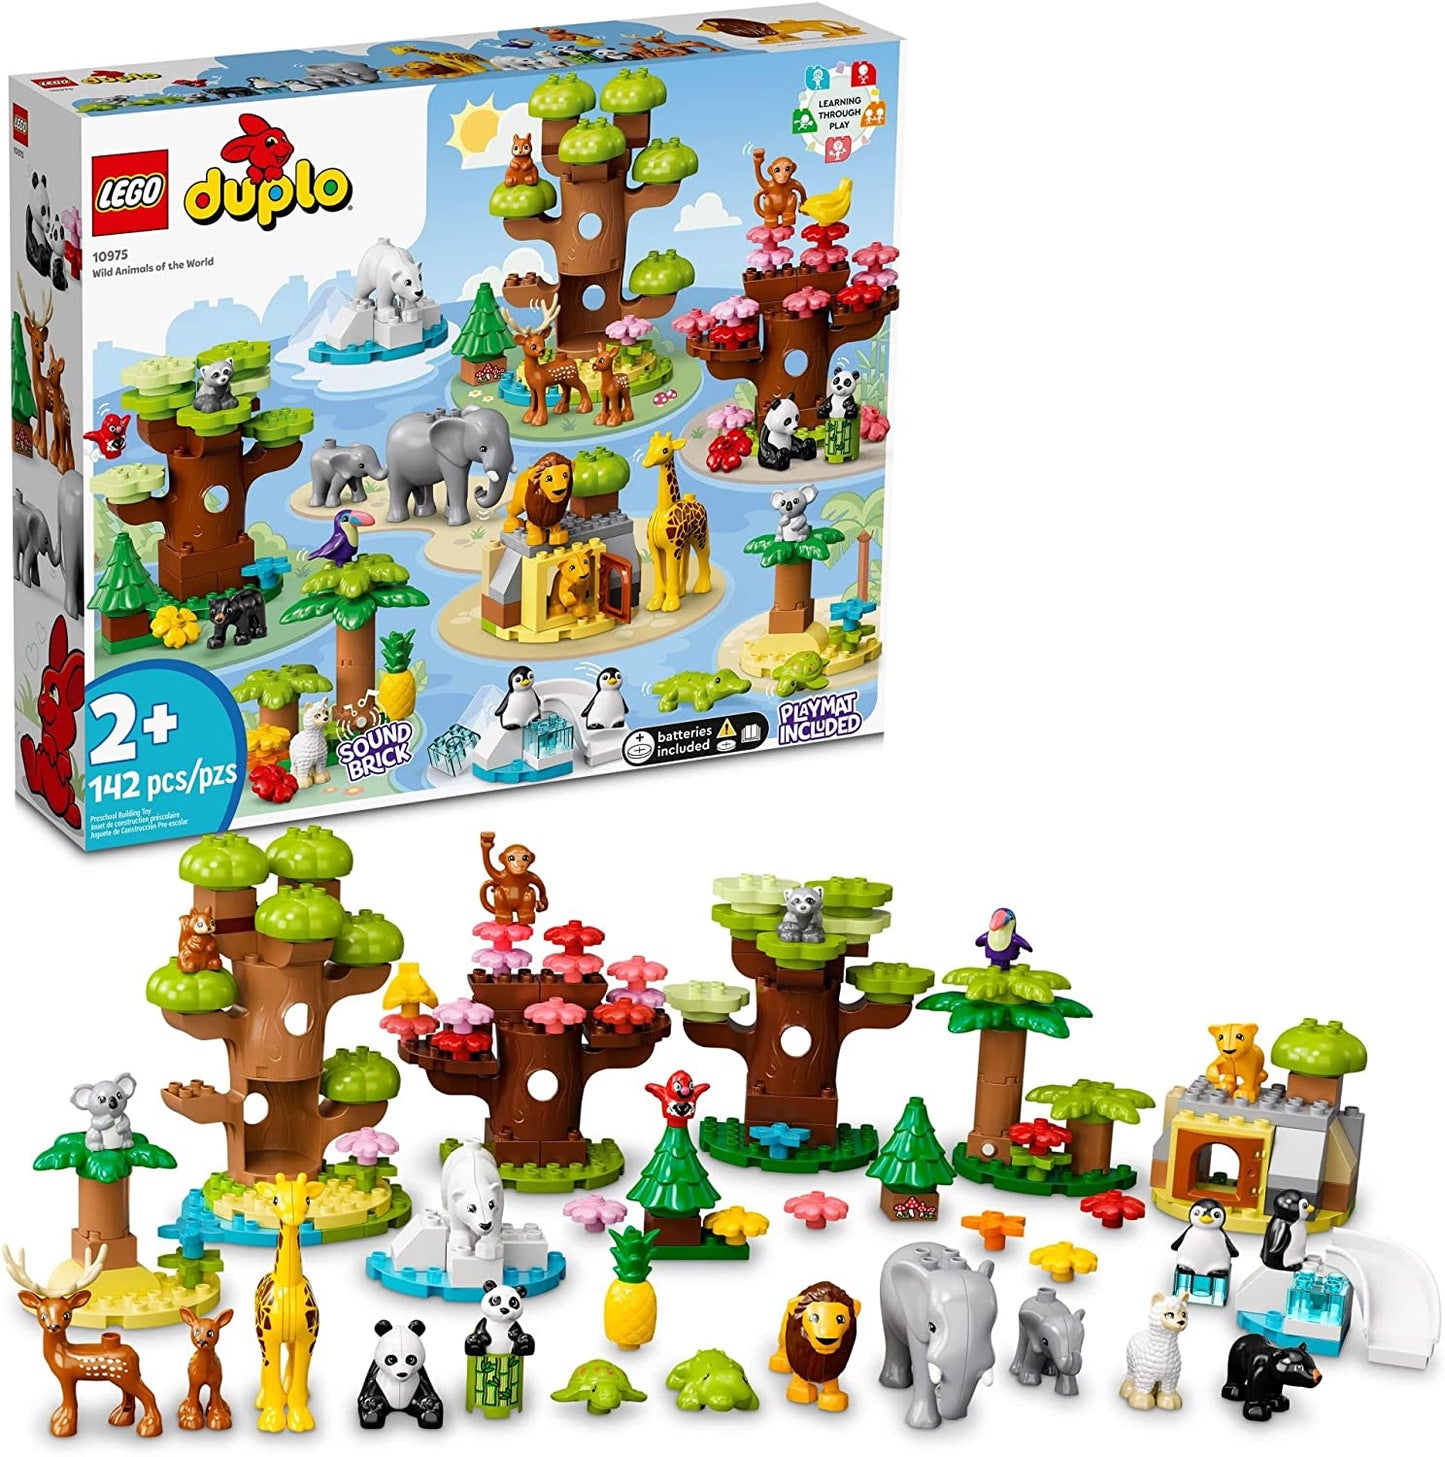 LEGO DUPLO Wild Animals of The World 10975 Toy with 22 Animal Figures, Sounds and World Map Playmat, 2-5 Year Old